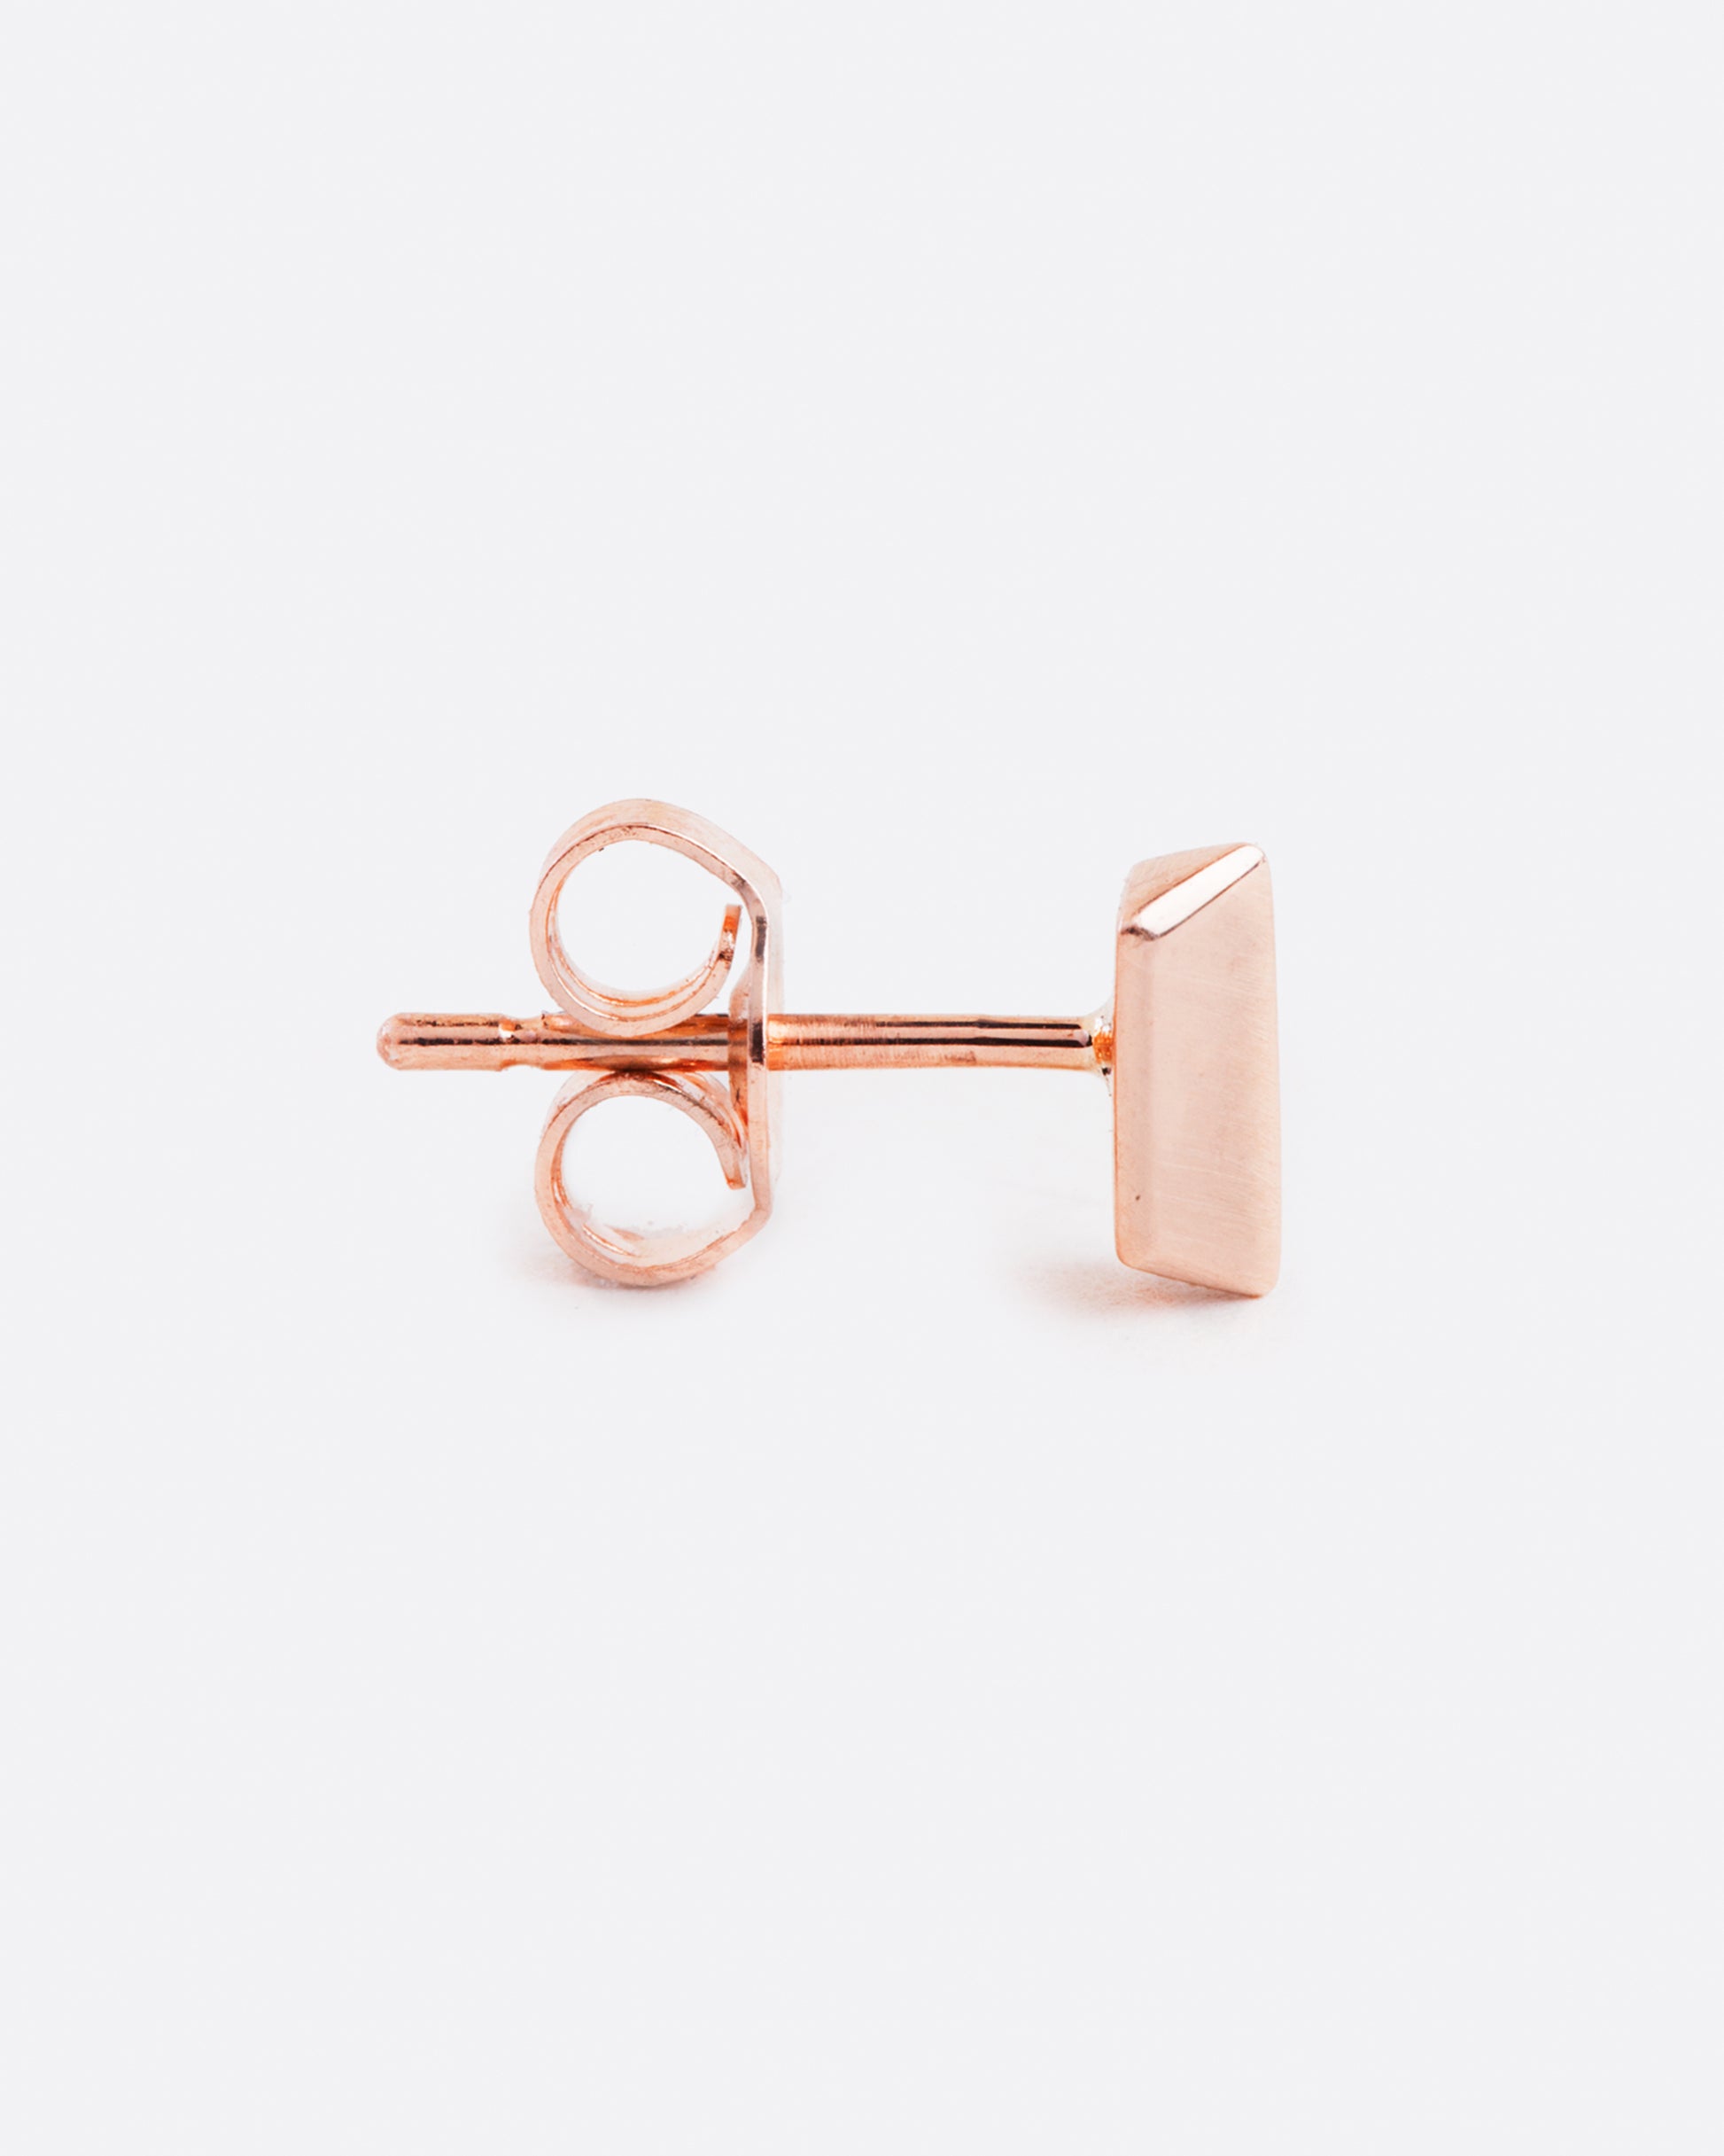 14k rose gold angled bar stud earring by Selin Kent, shown from the side.